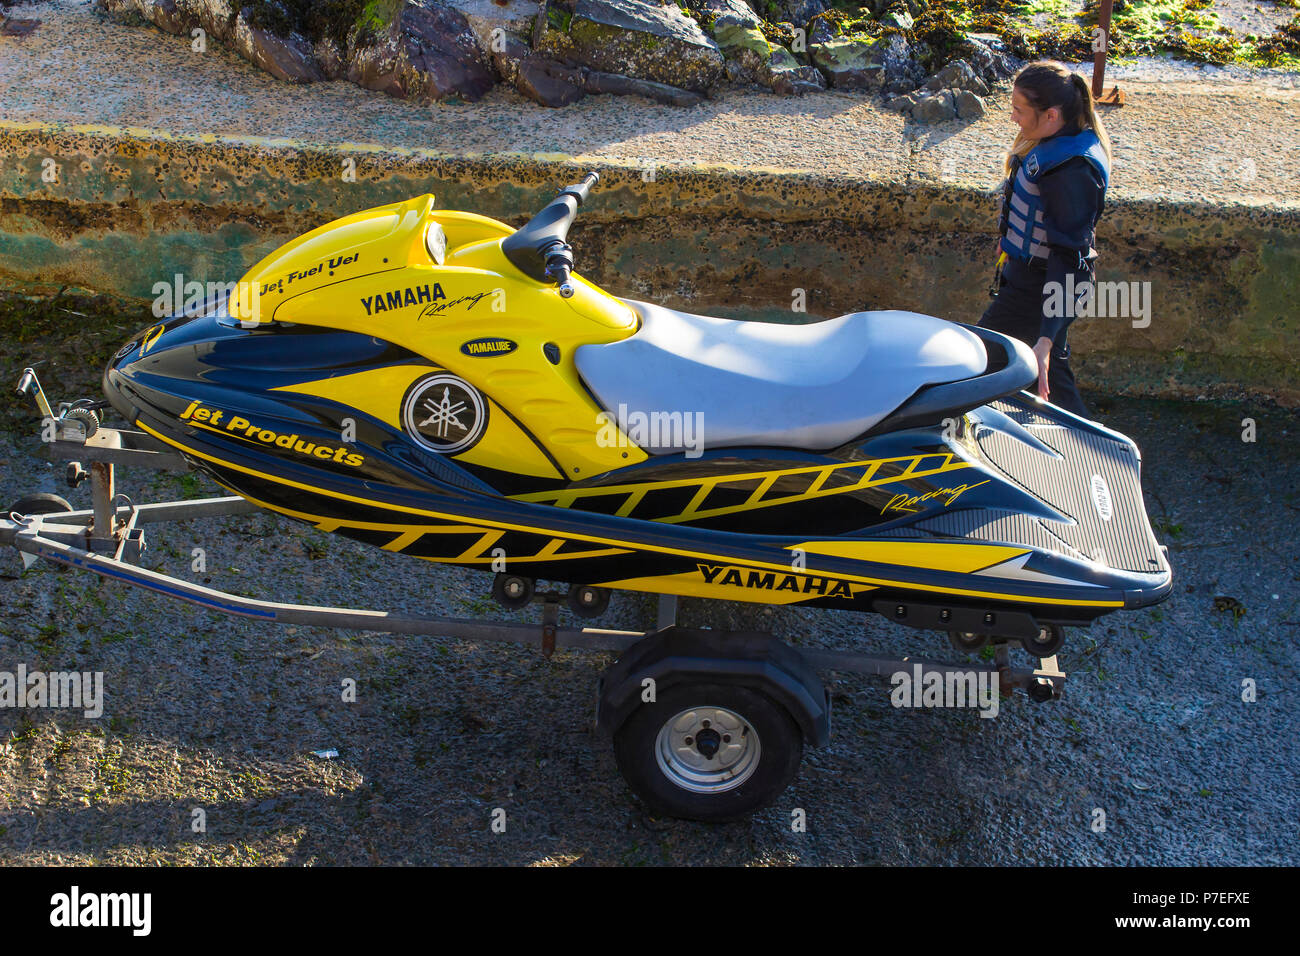 29 June 2018 A powerful Yamaha Jet-Ski on a trailer before launching at Groomsport Harbour Northern Ireland Stock Photo